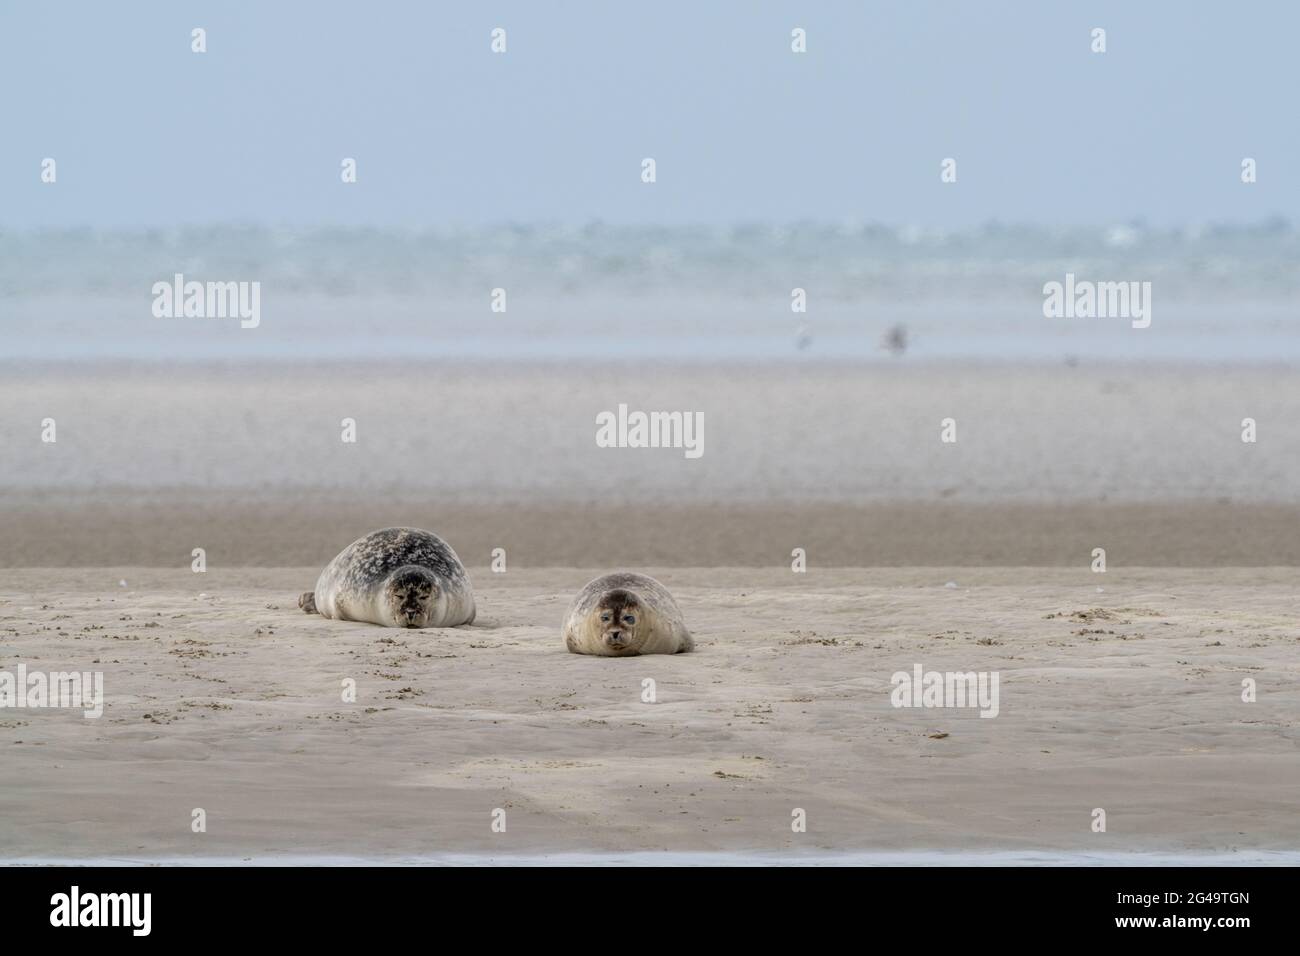 Two common seals basking in the sun on a sandbank in the Wadden Sea common seals basking in the sun on a sandbank in the Wadden Stock Photo